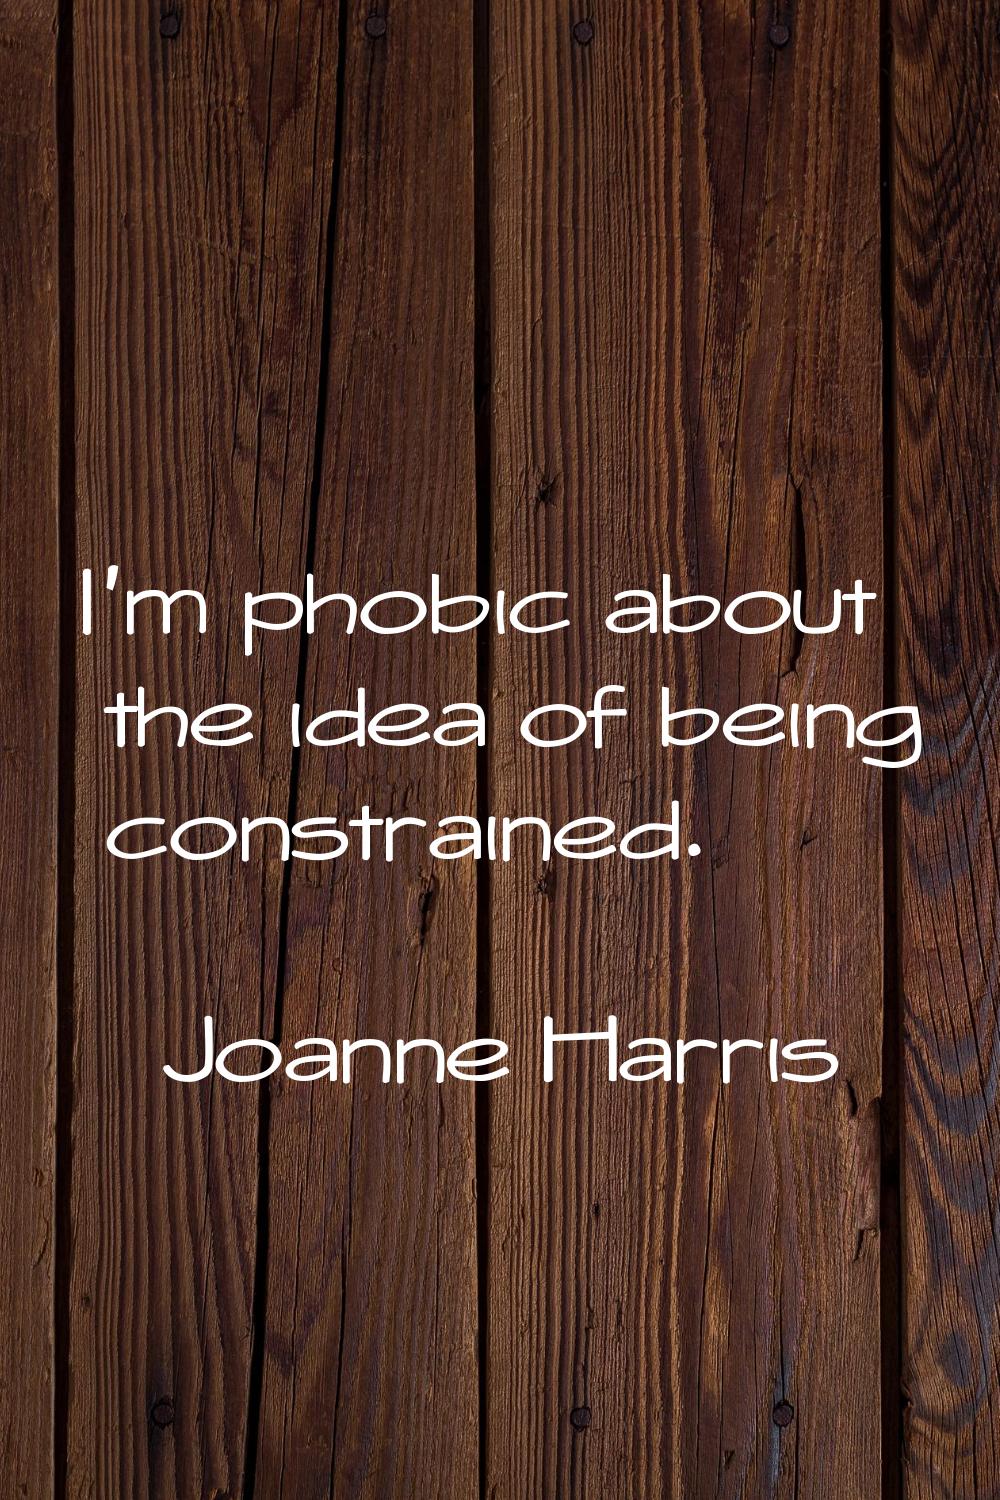 I'm phobic about the idea of being constrained.